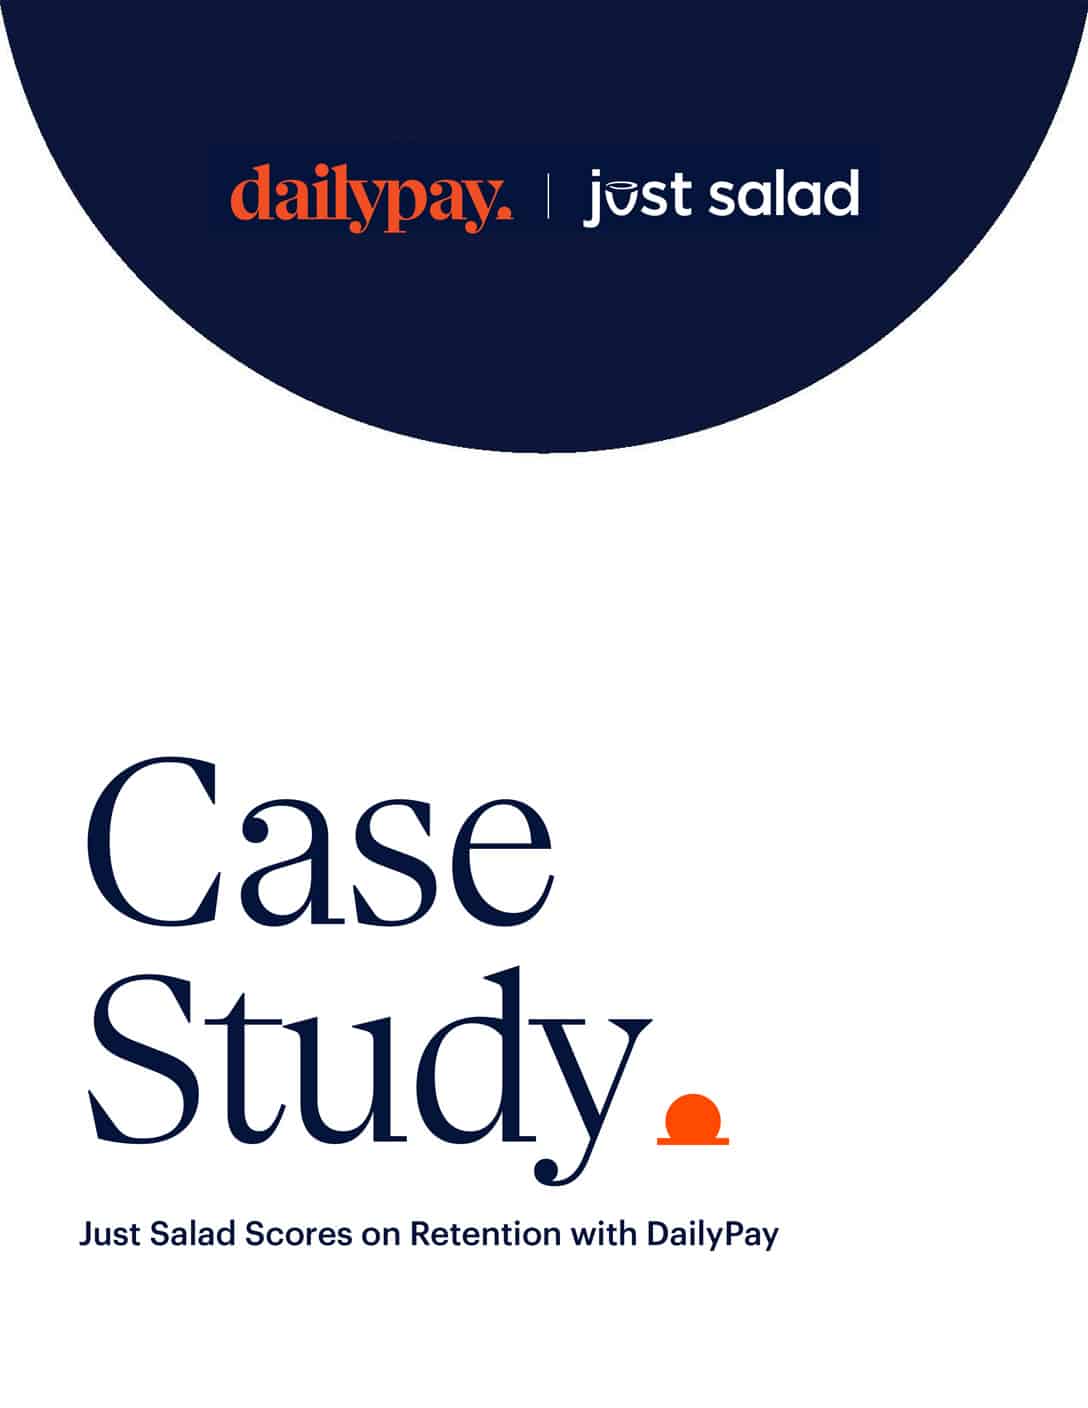 Just Salad Scores on Retention With DailyPay